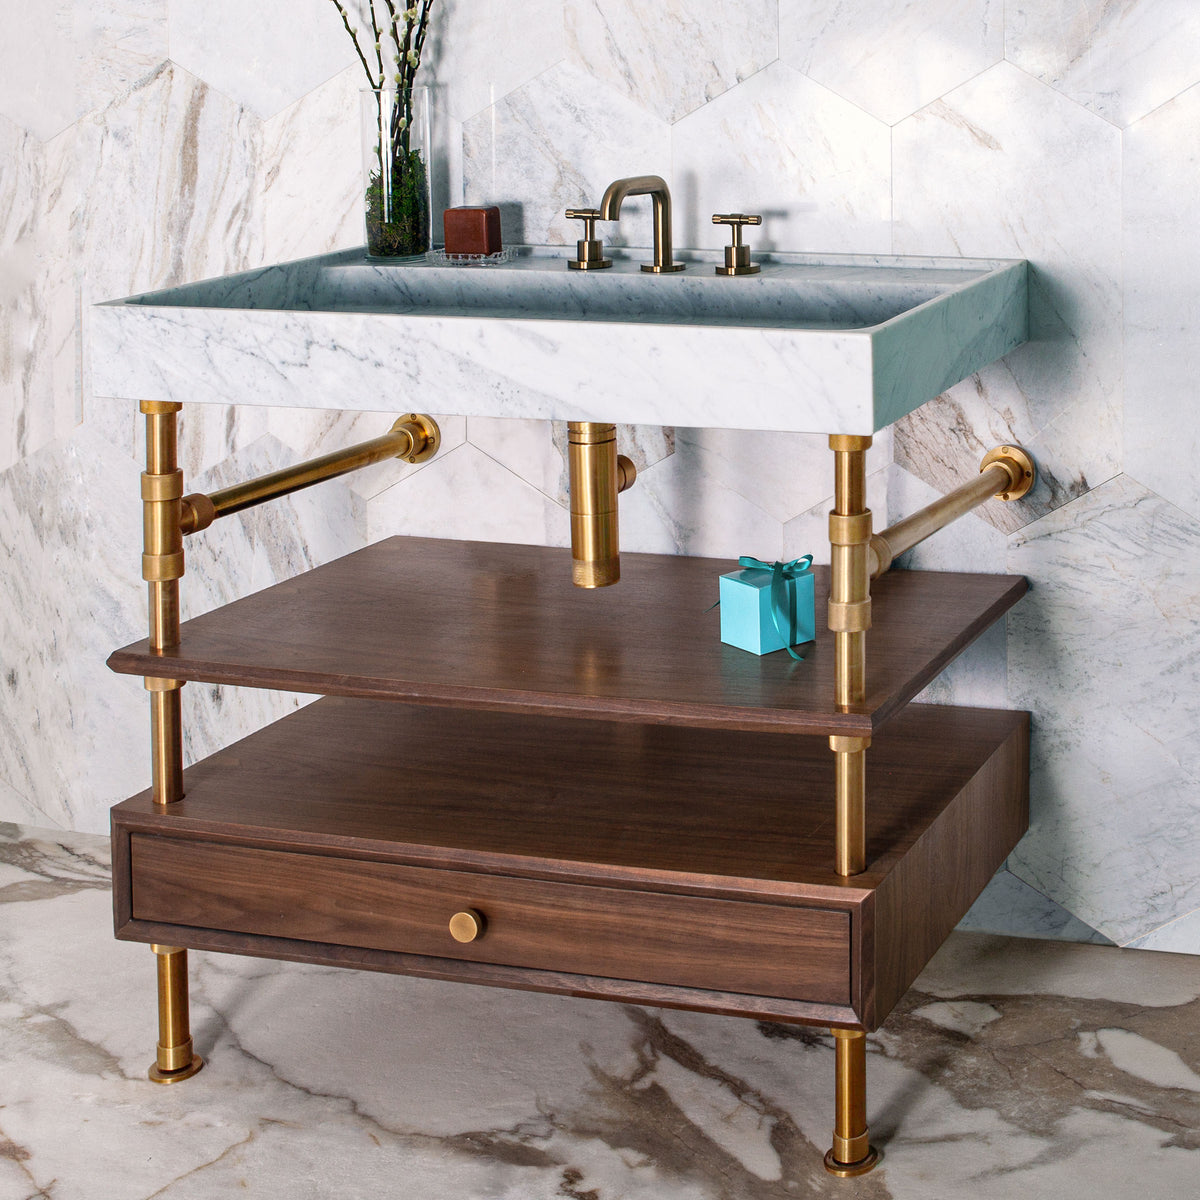 Ventus Bath Sink with Faucet Deck Elemental Classic Console Vanity image 1 of 2